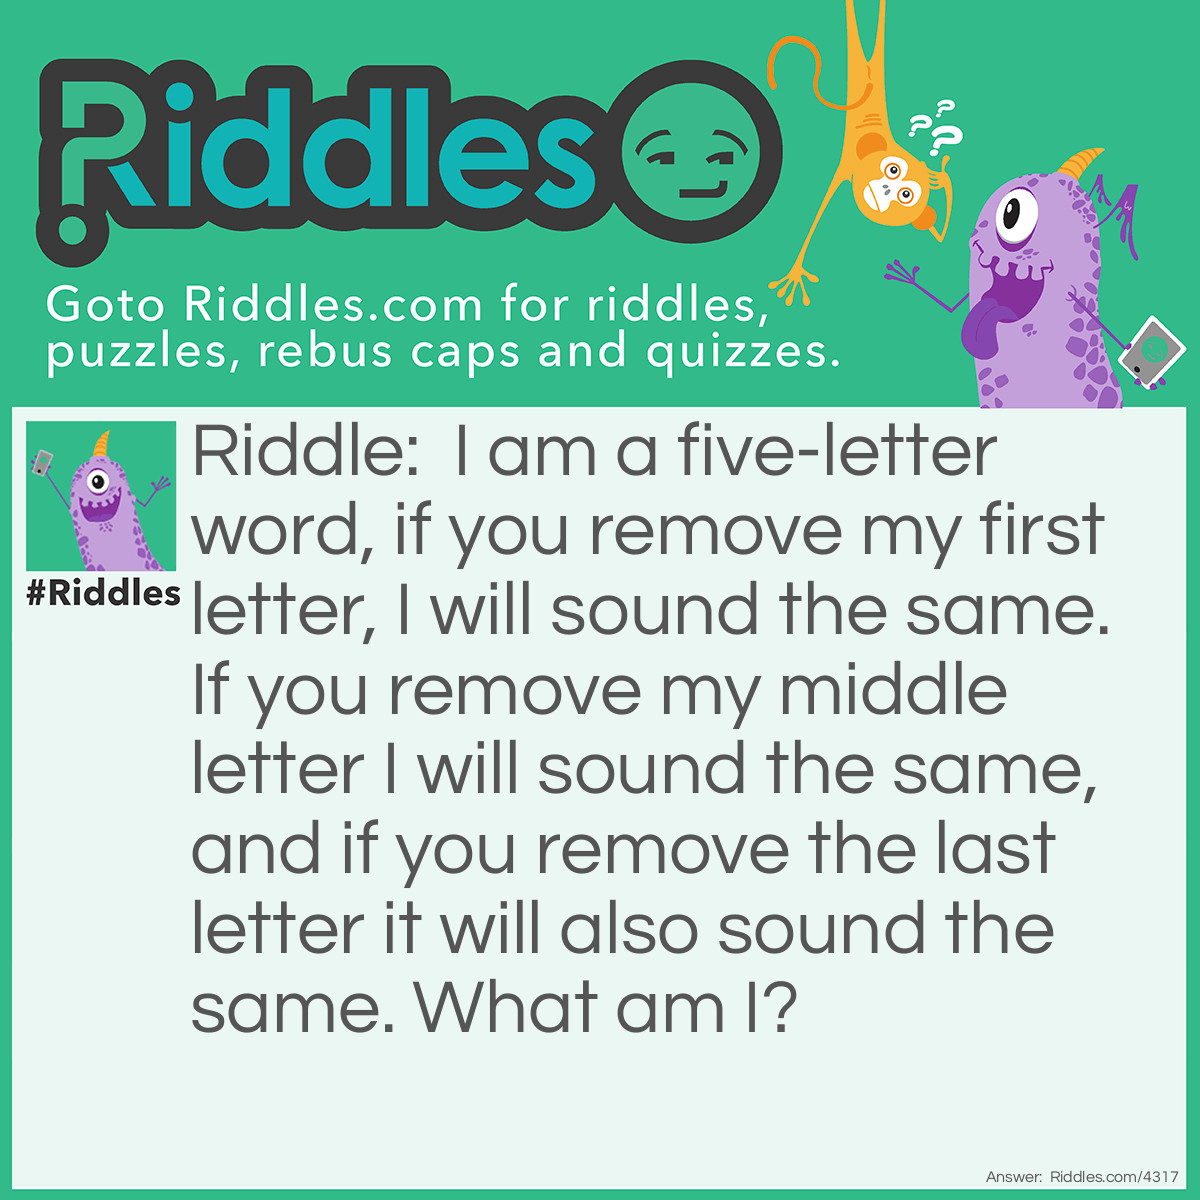 Riddle: I am a five-letter word, if you remove my first letter, I will sound the same. If you remove my middle letter I will sound the same, and if you remove the last letter it will also sound the same. What am I? Answer: Empty.